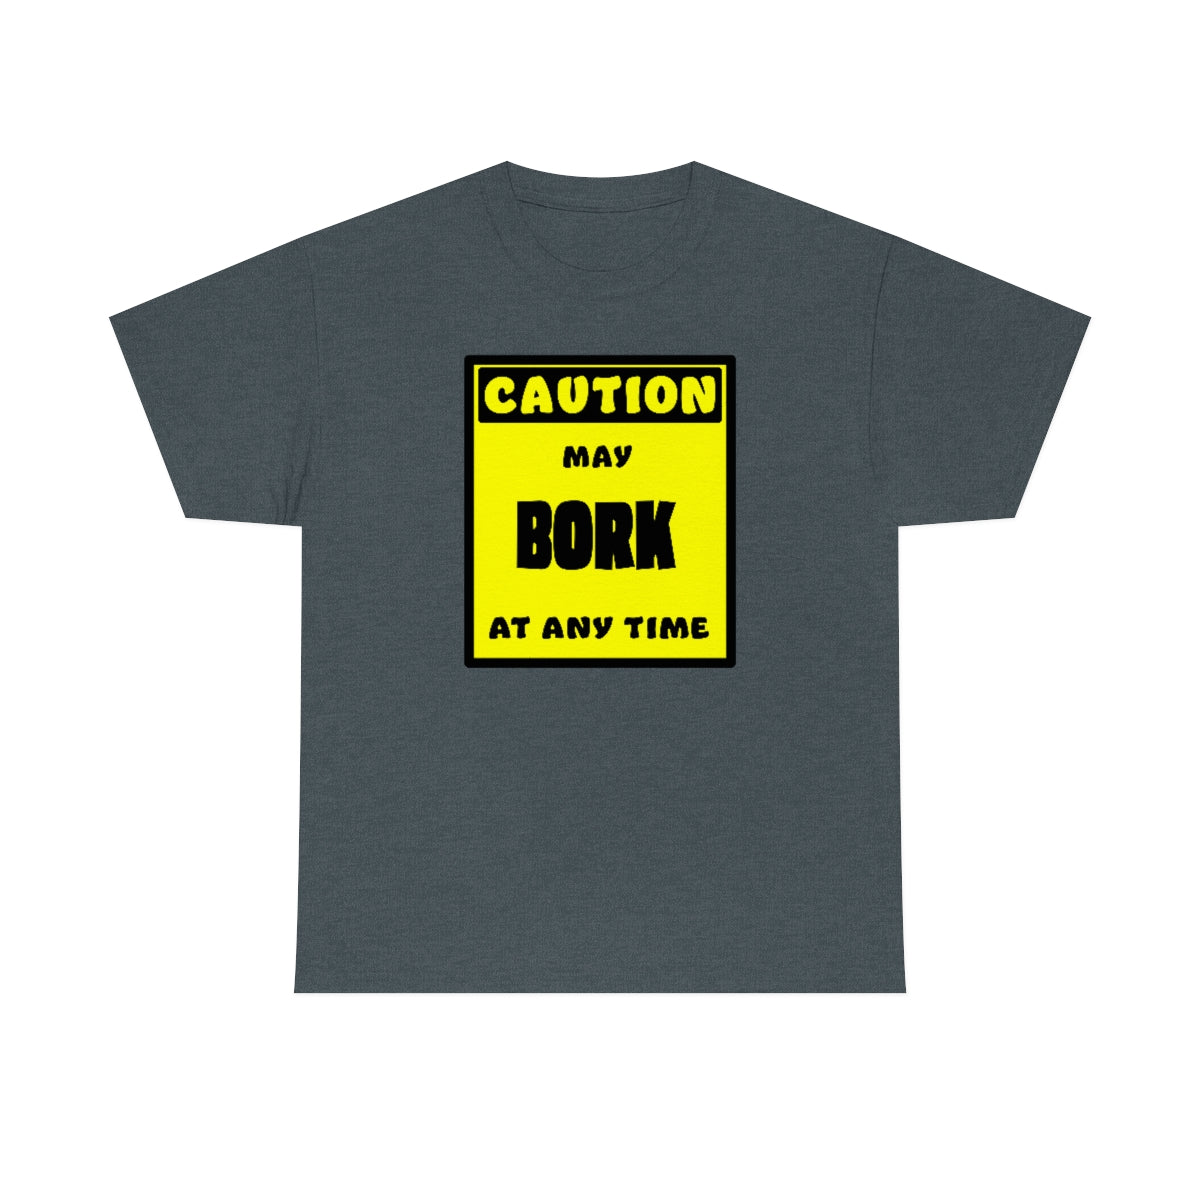 CAUTION! May BORK at any time! - T-Shirt T-Shirt AFLT-Whootorca Dark Heather S 